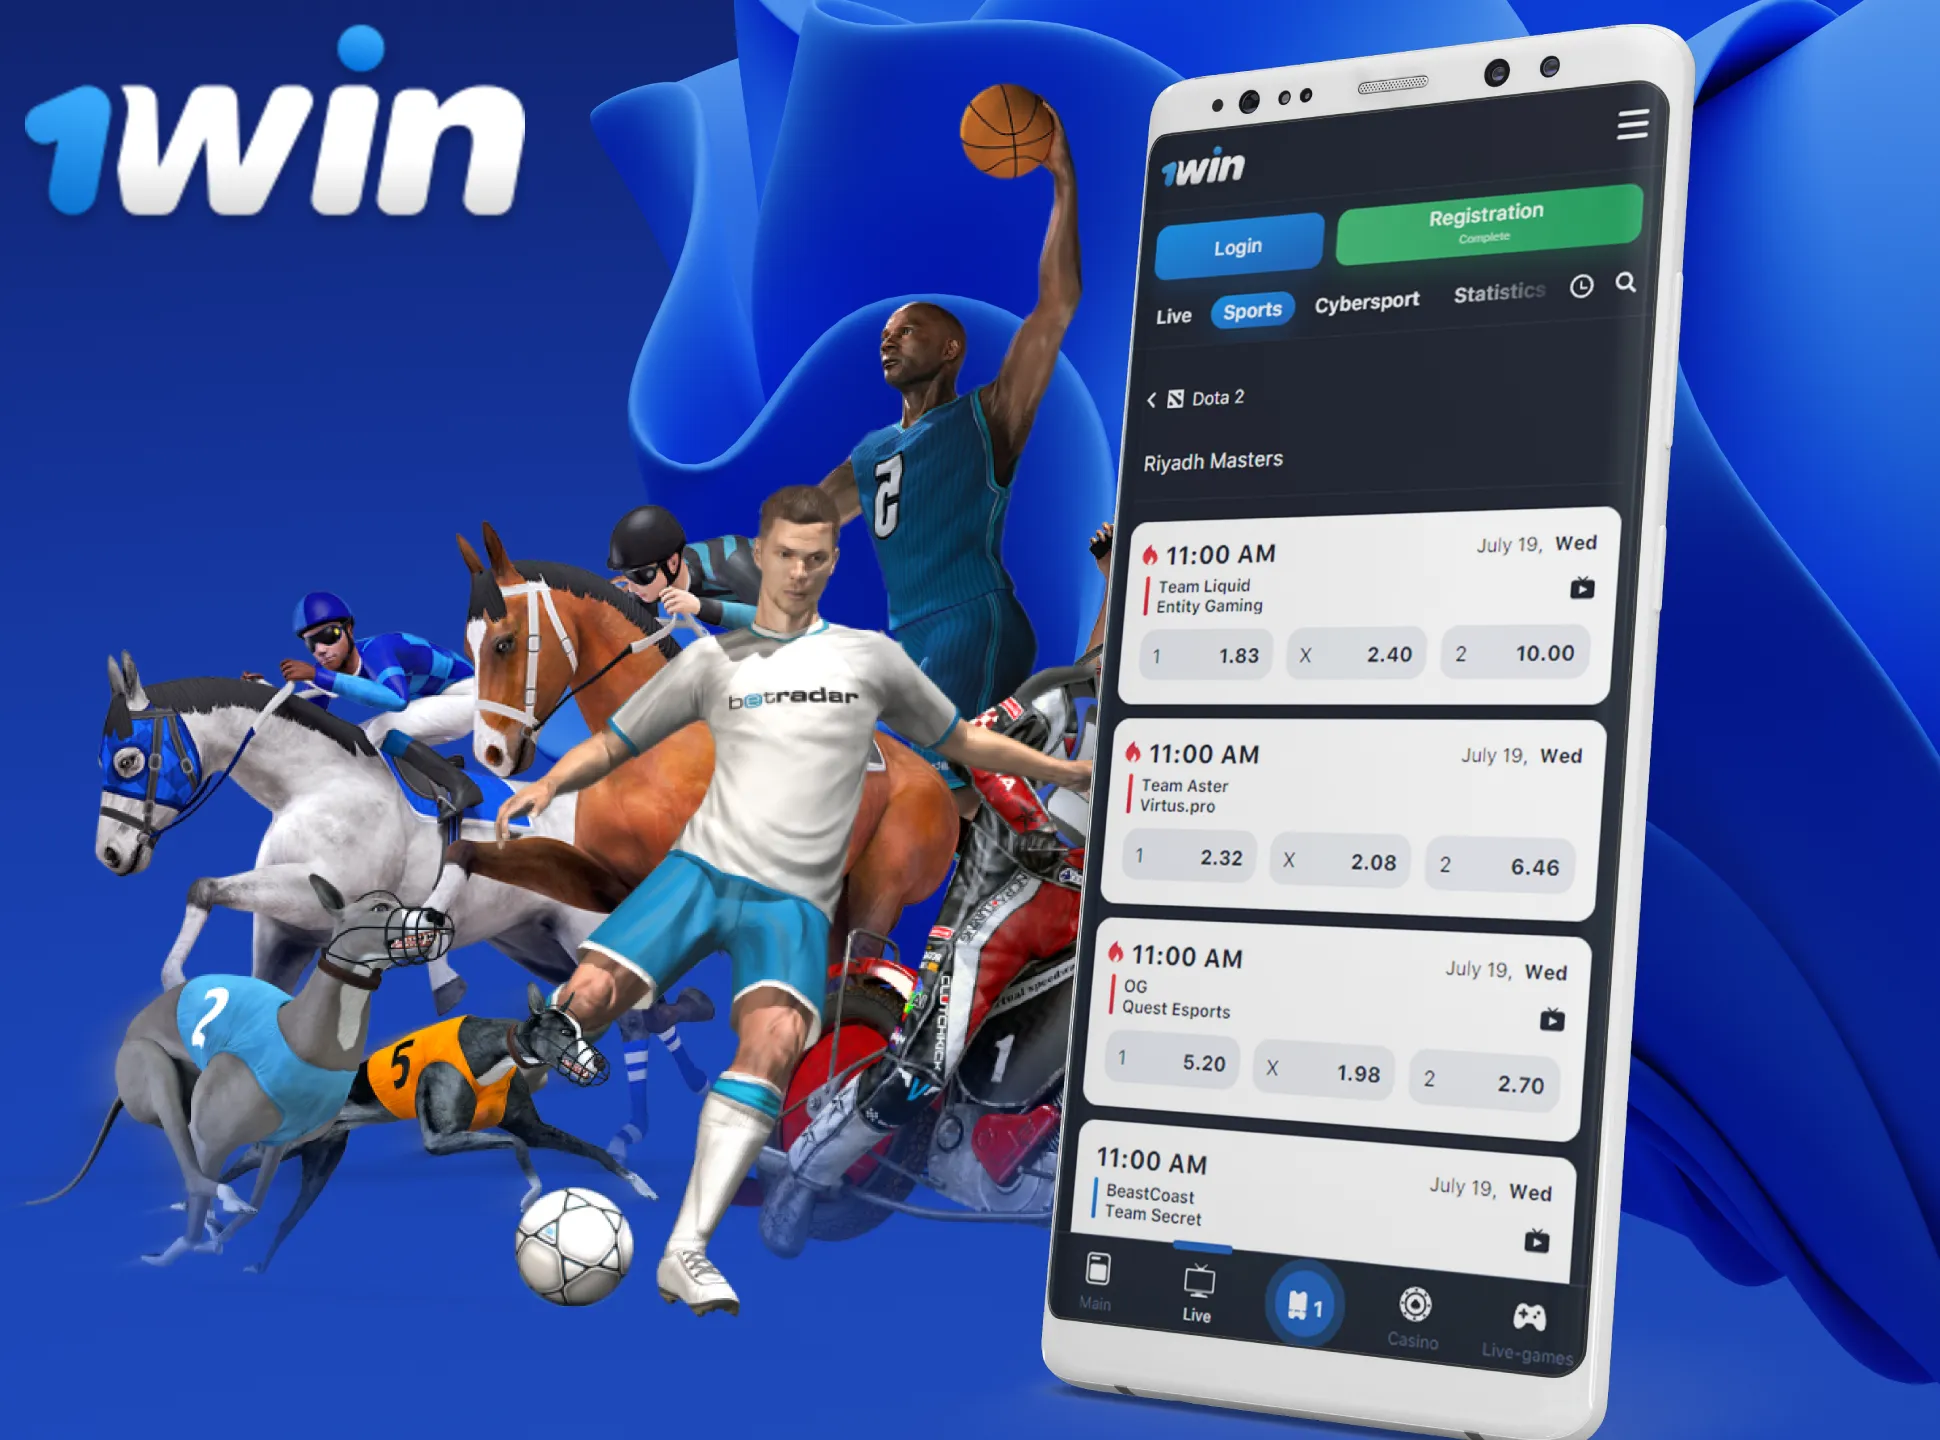 1win app offers you betting on the virtual sports as well.